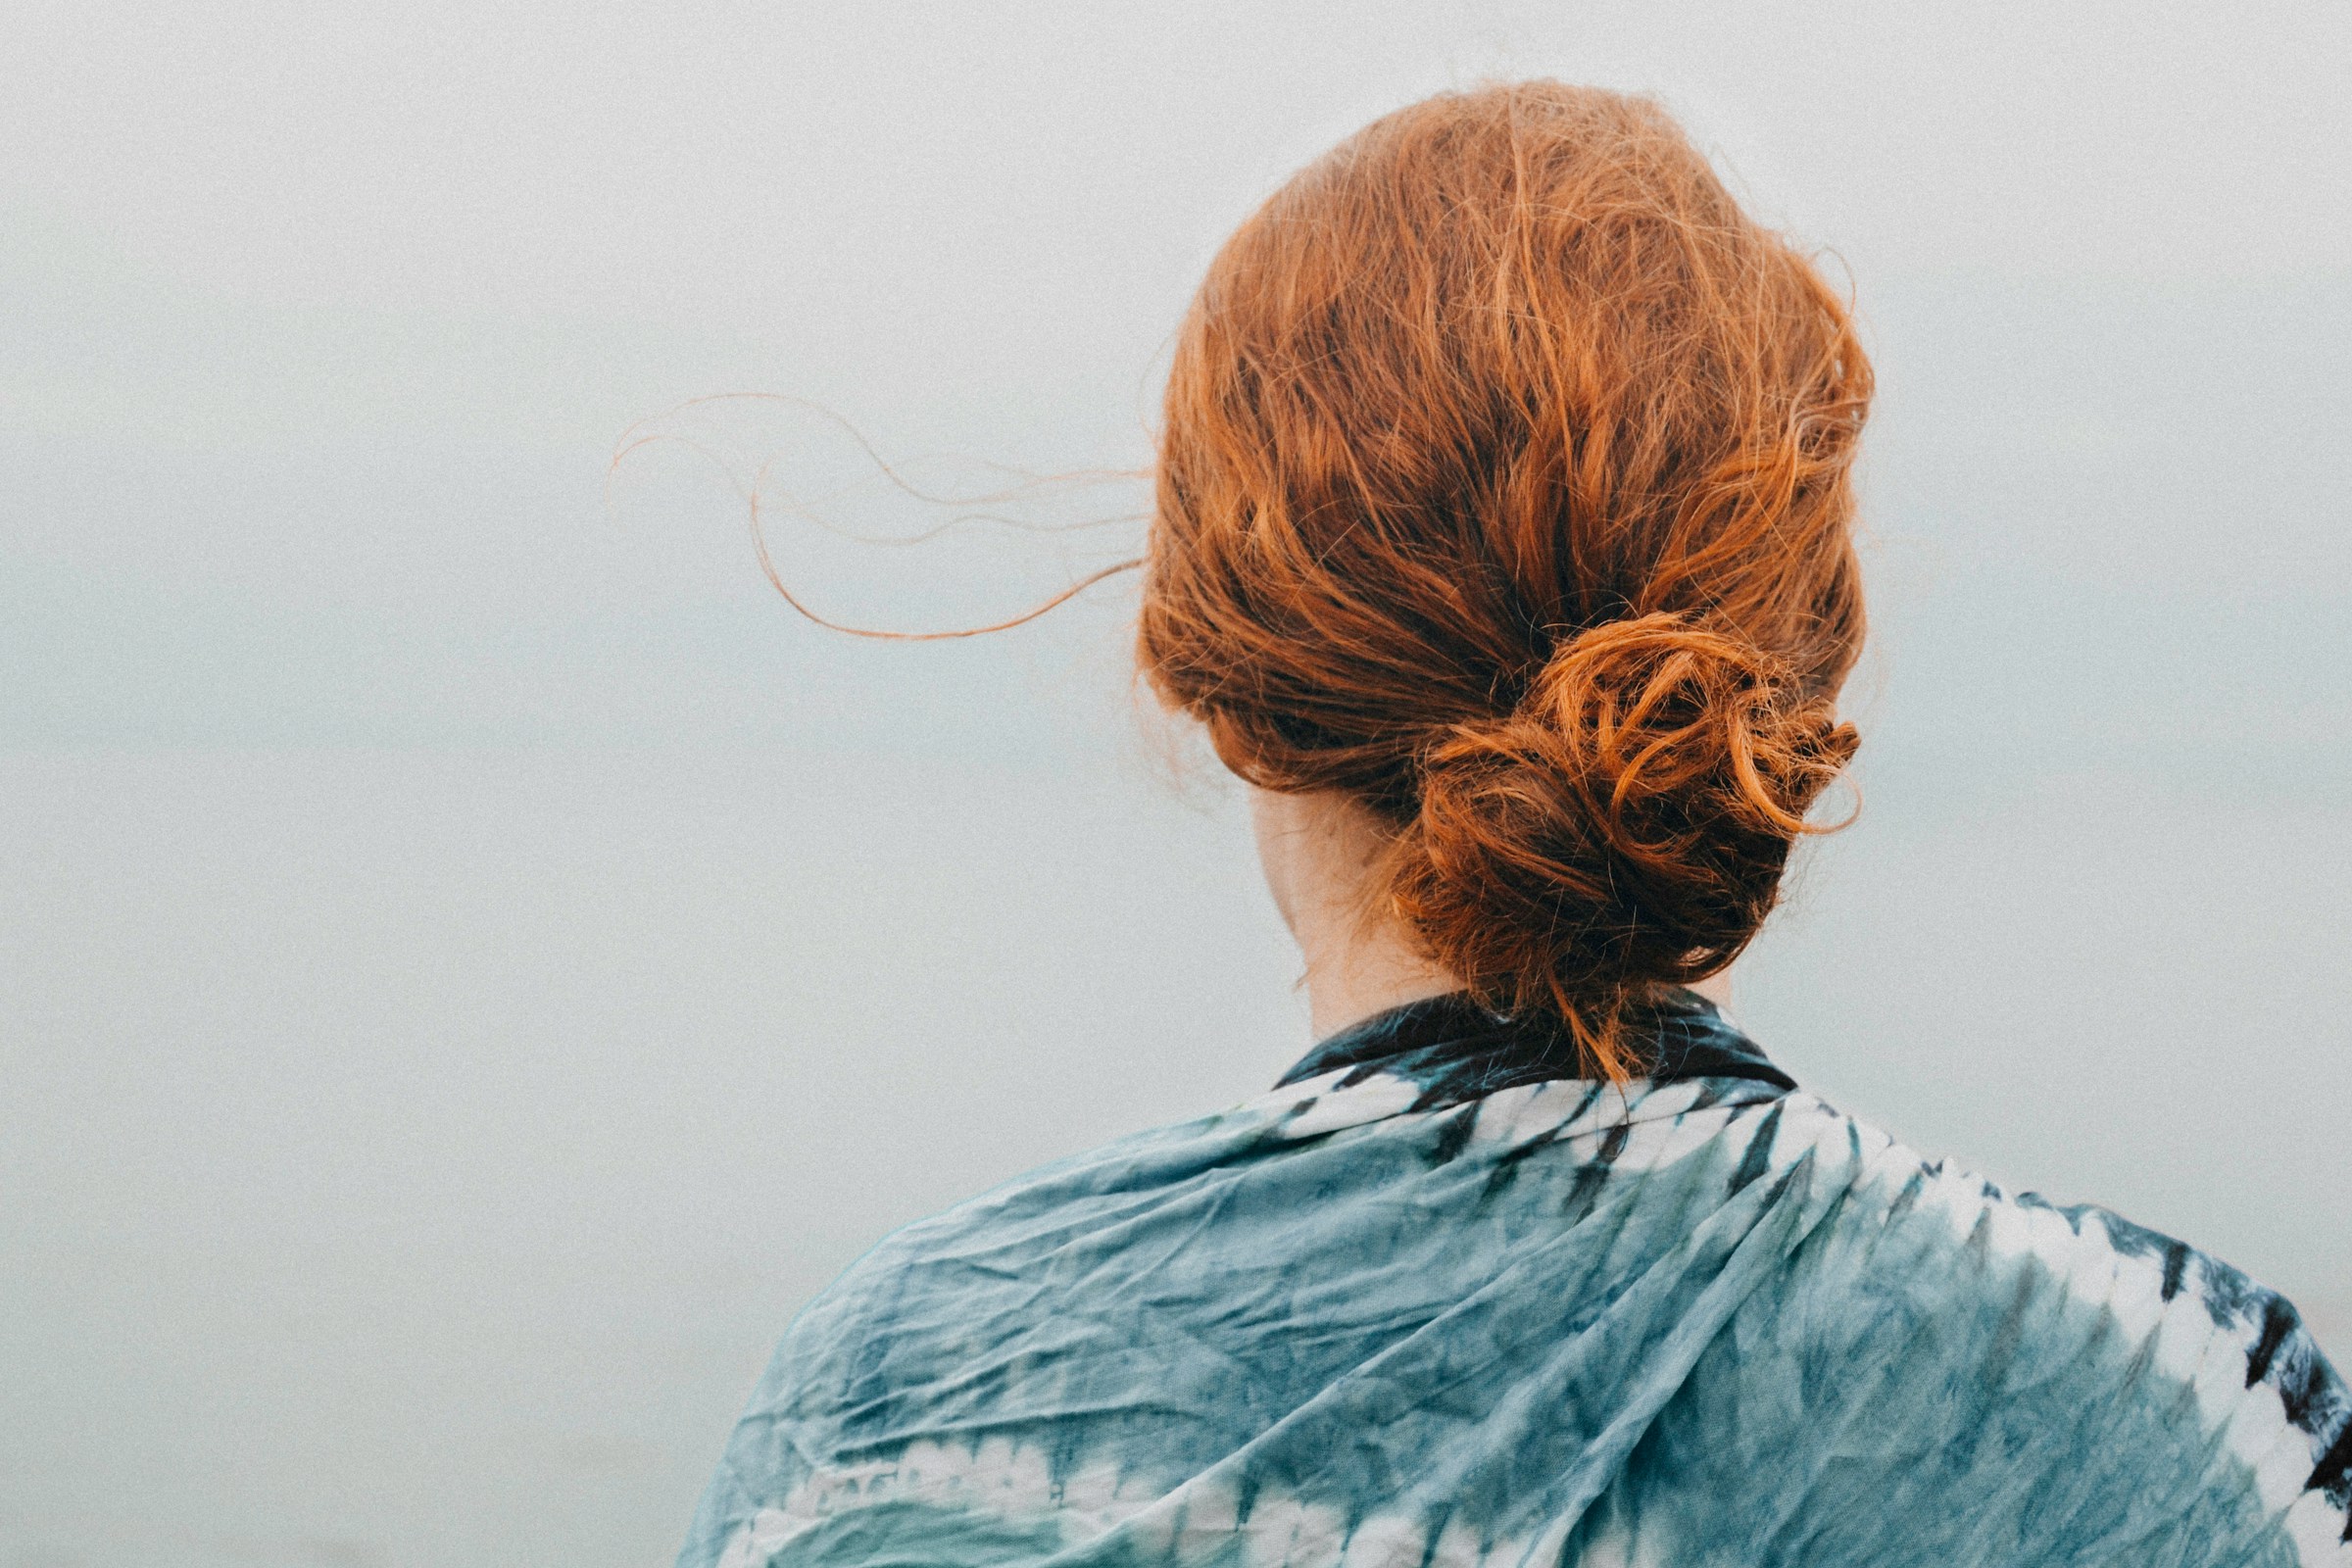 A woman showing off red hair | Source: Unsplash